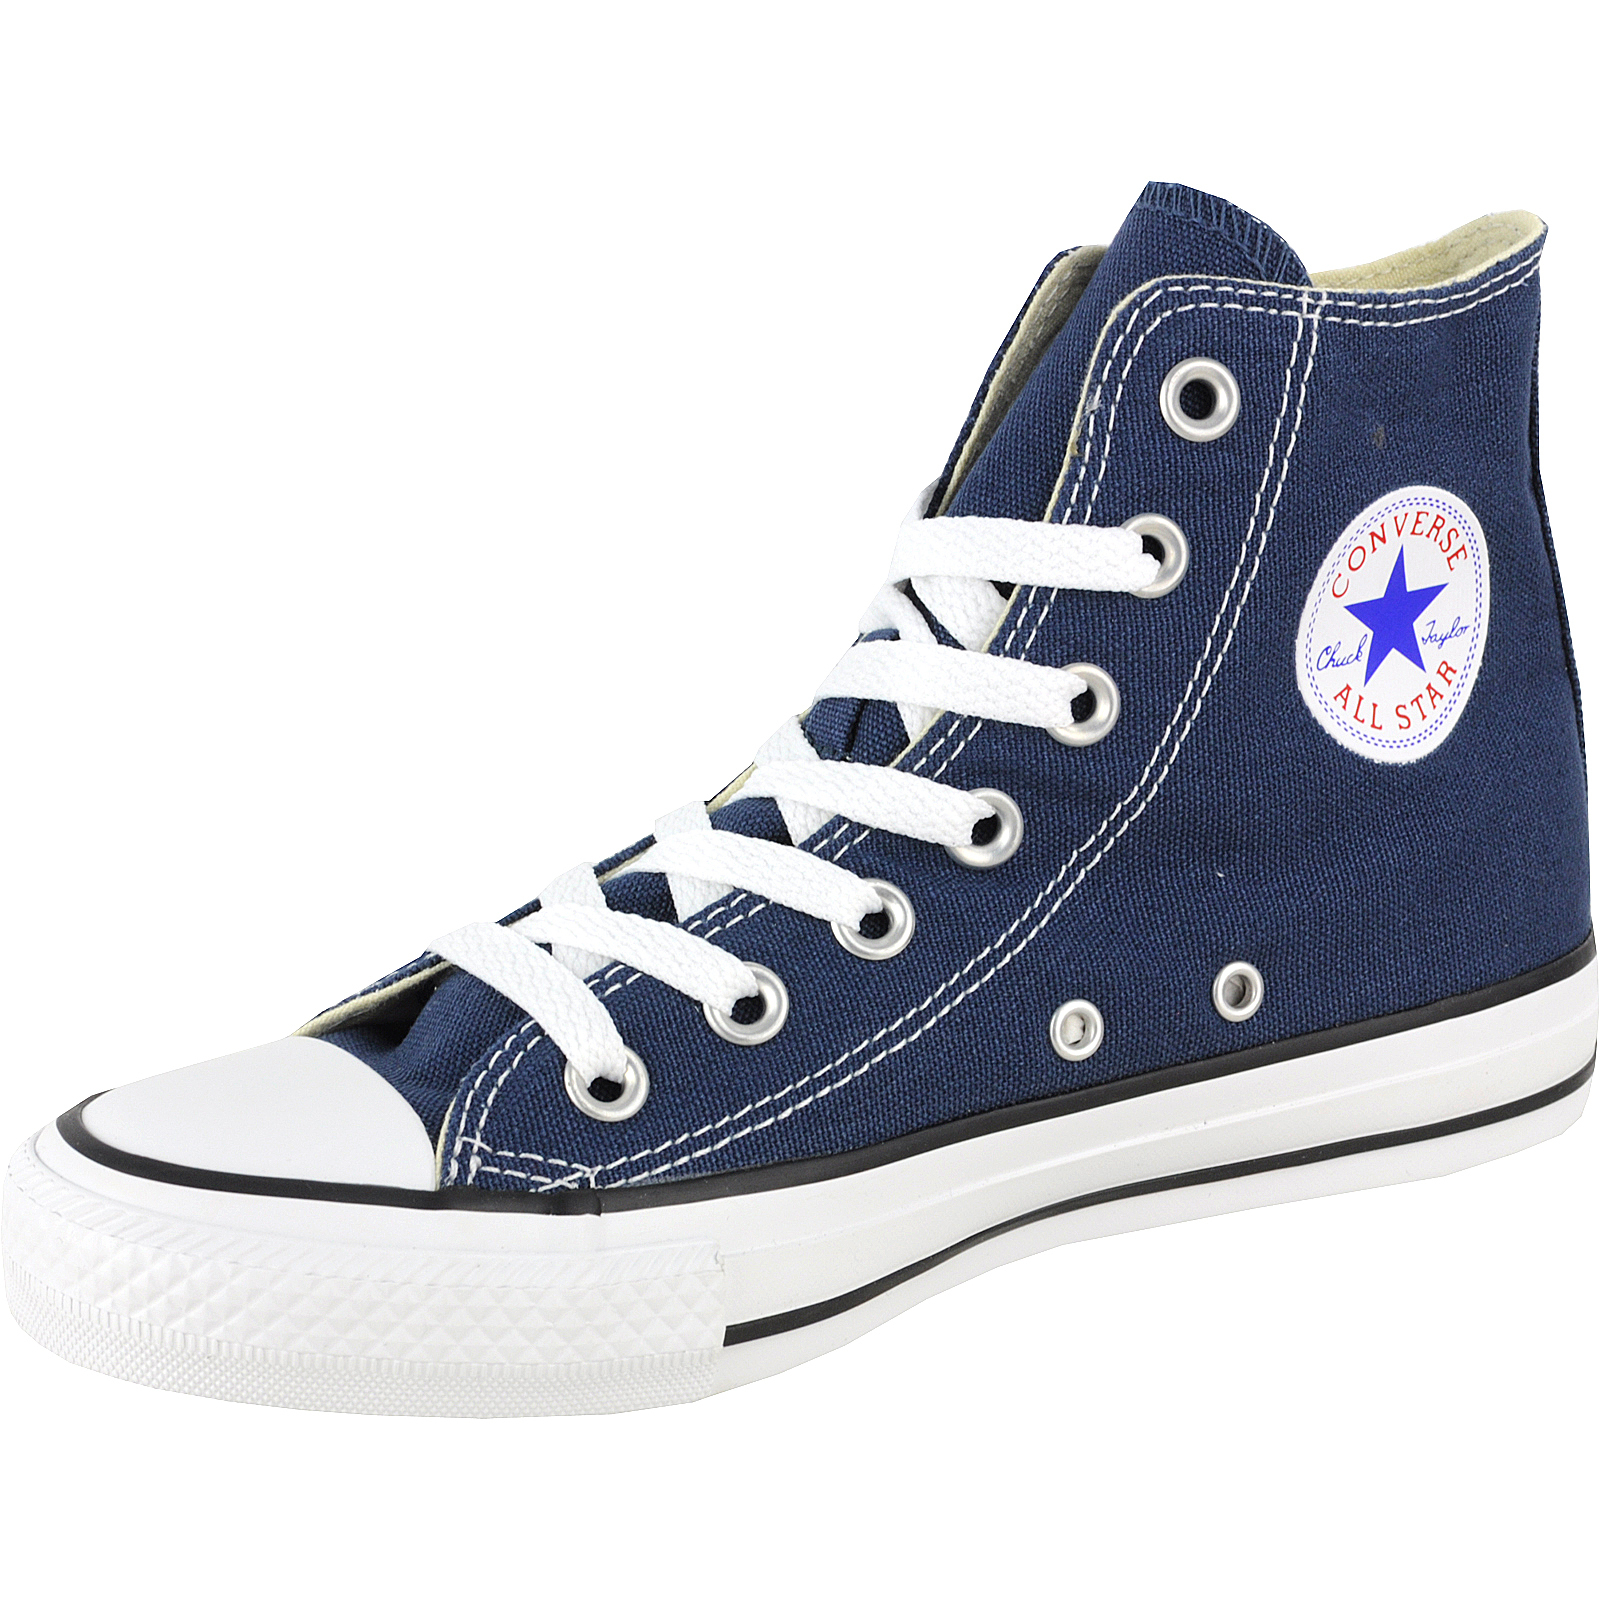 Gooey Healthy Supersonic speed Tenisi, Sneakers unisex Converse Chuck Taylor All Star Hi M9622C